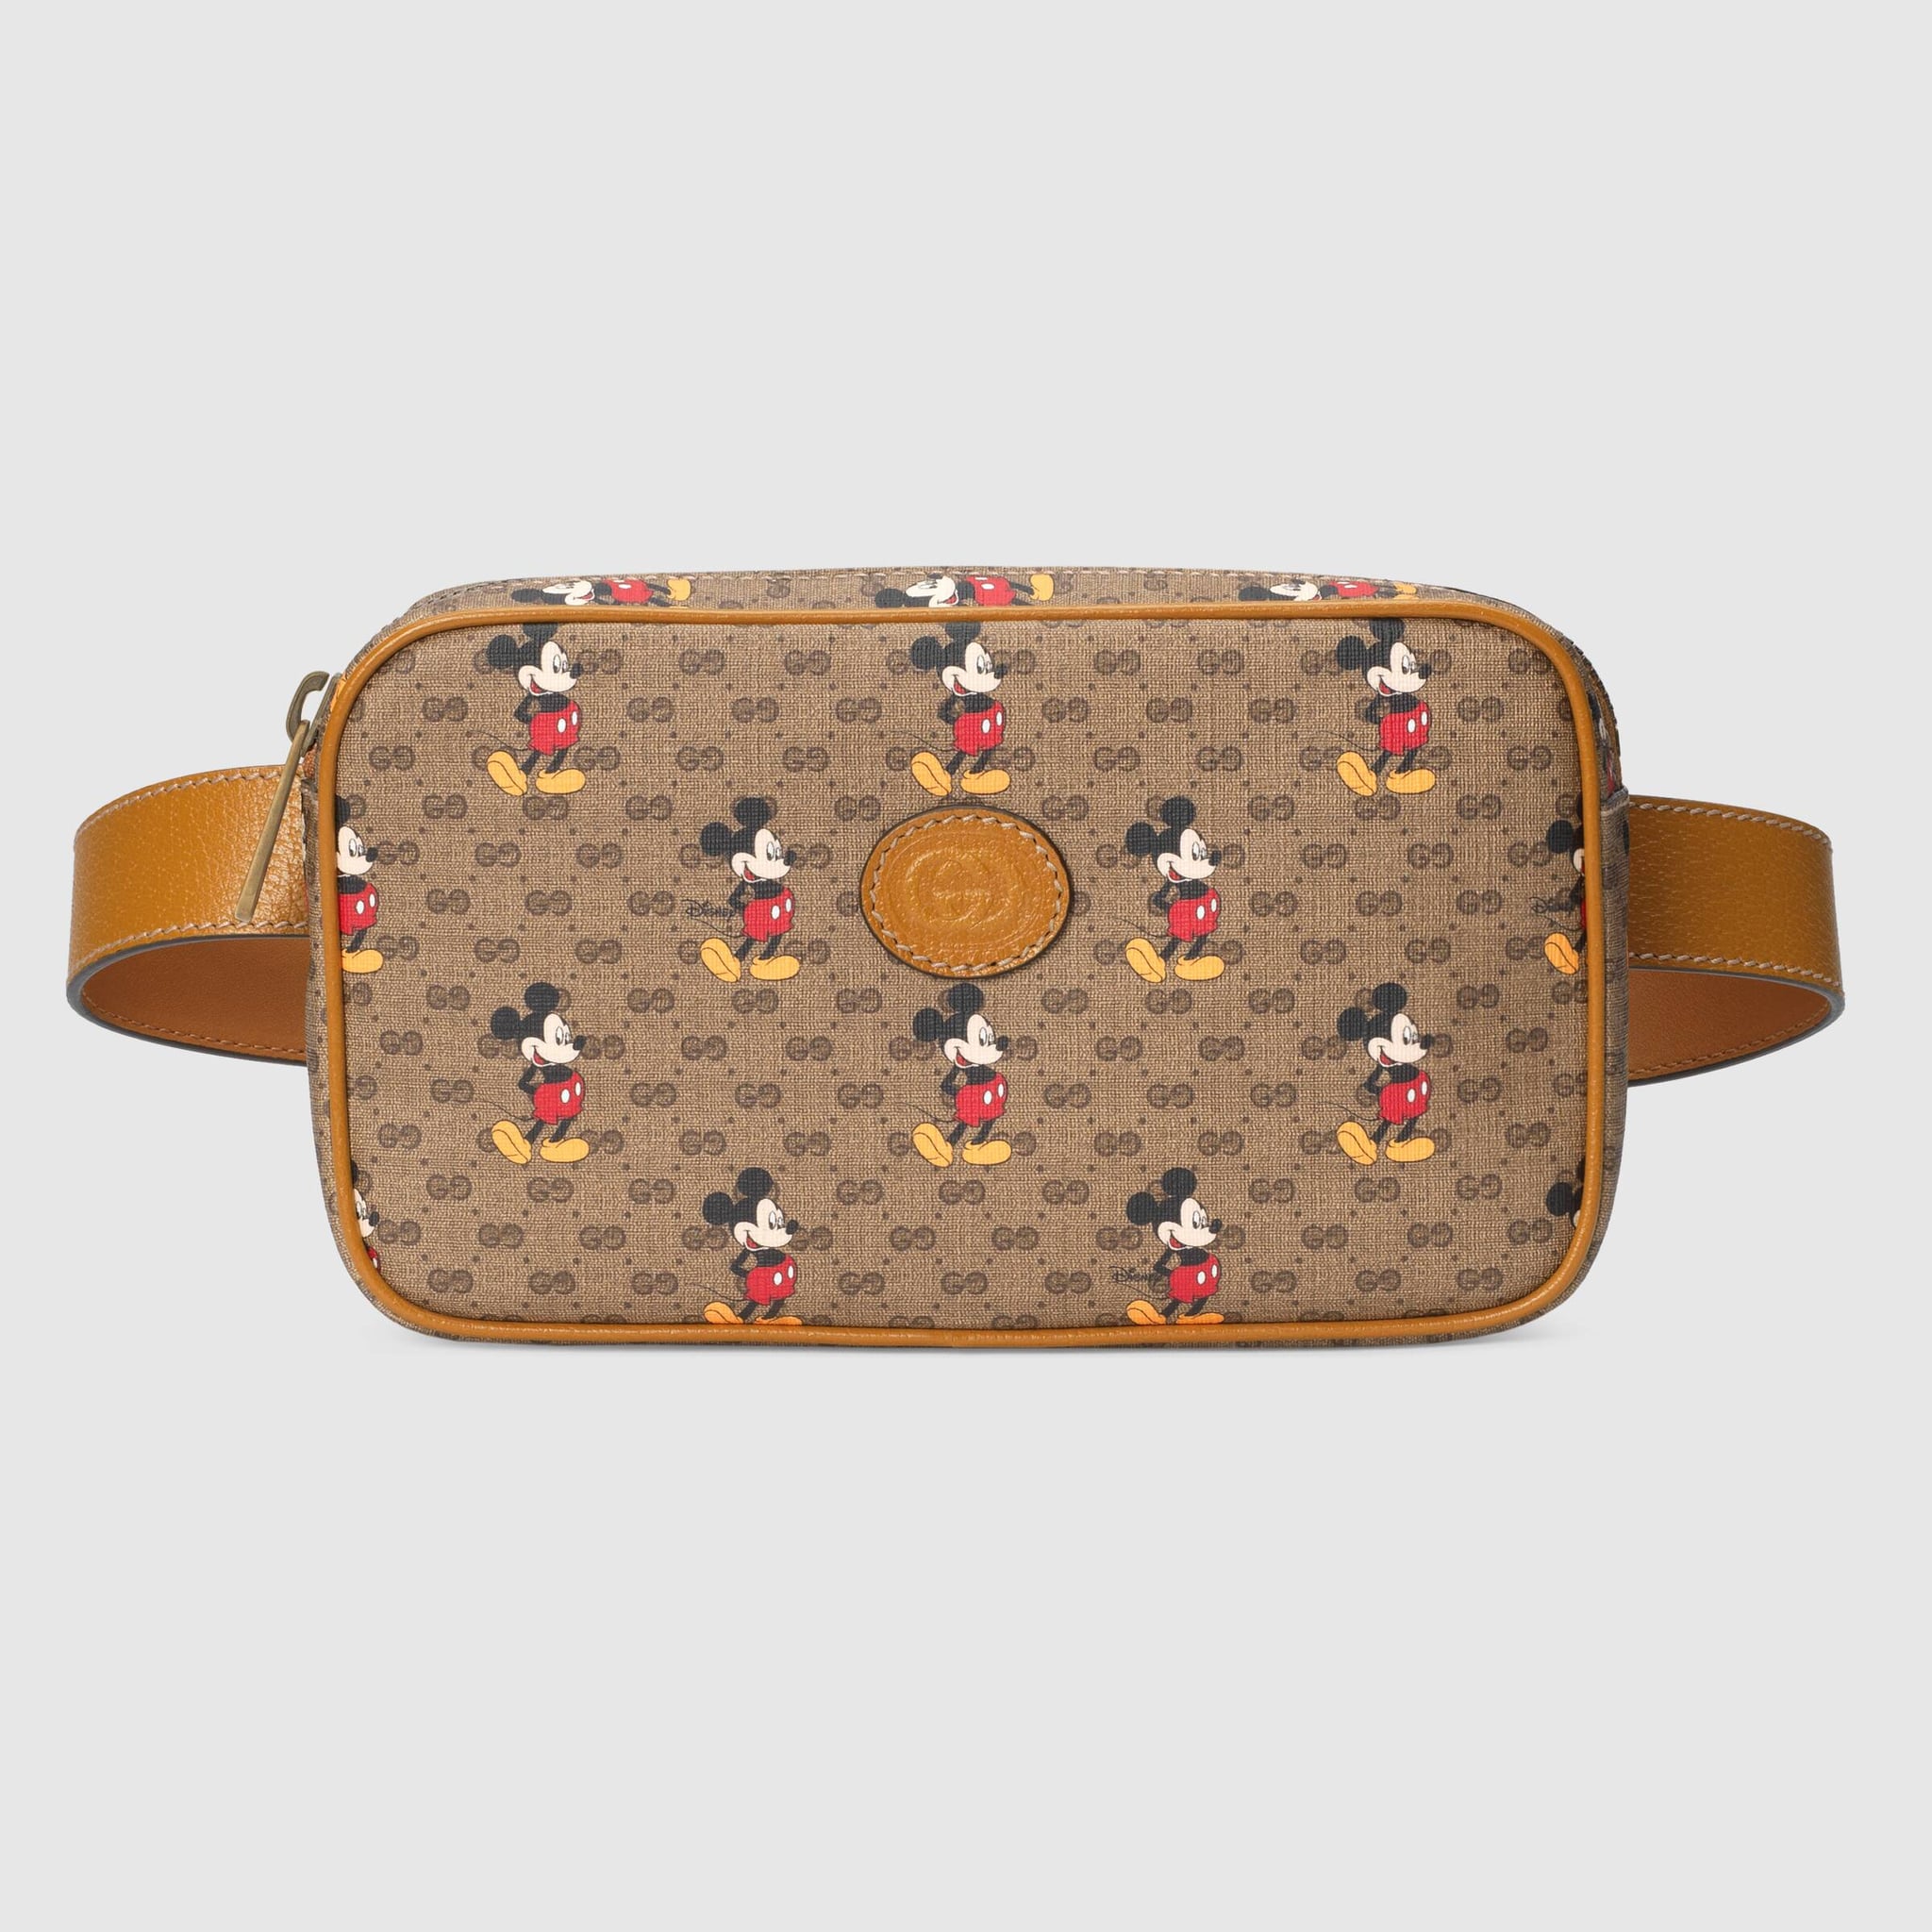 gucci x mickey mouse bag